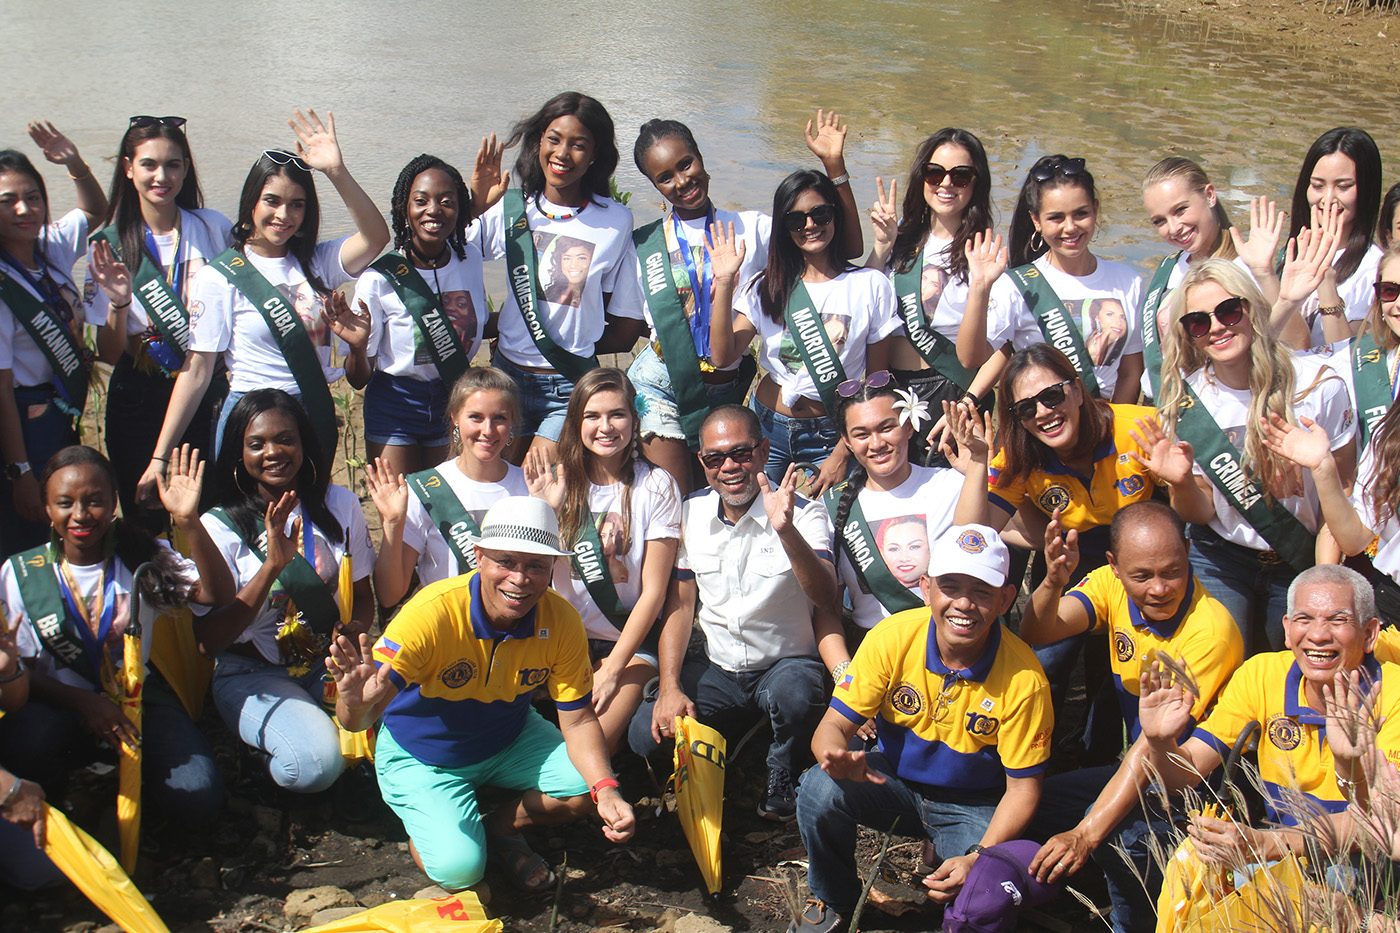 LOOK: Miss Earth candidates plant mangroves in Legazpi City